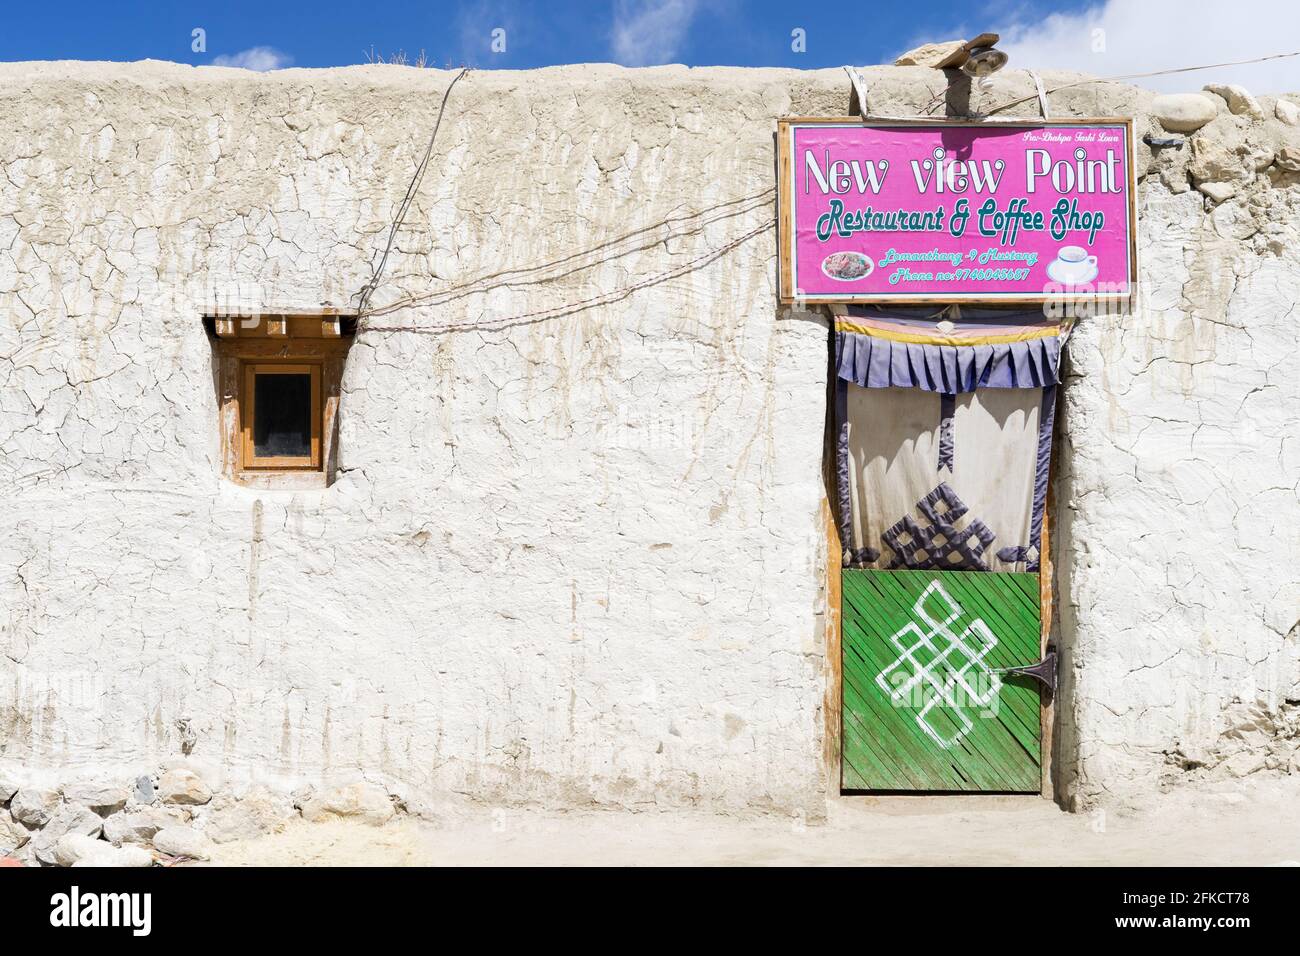 Facade of a restaurant in Lo Manthang, Upper Mustang region, Nepal. Stock Photo